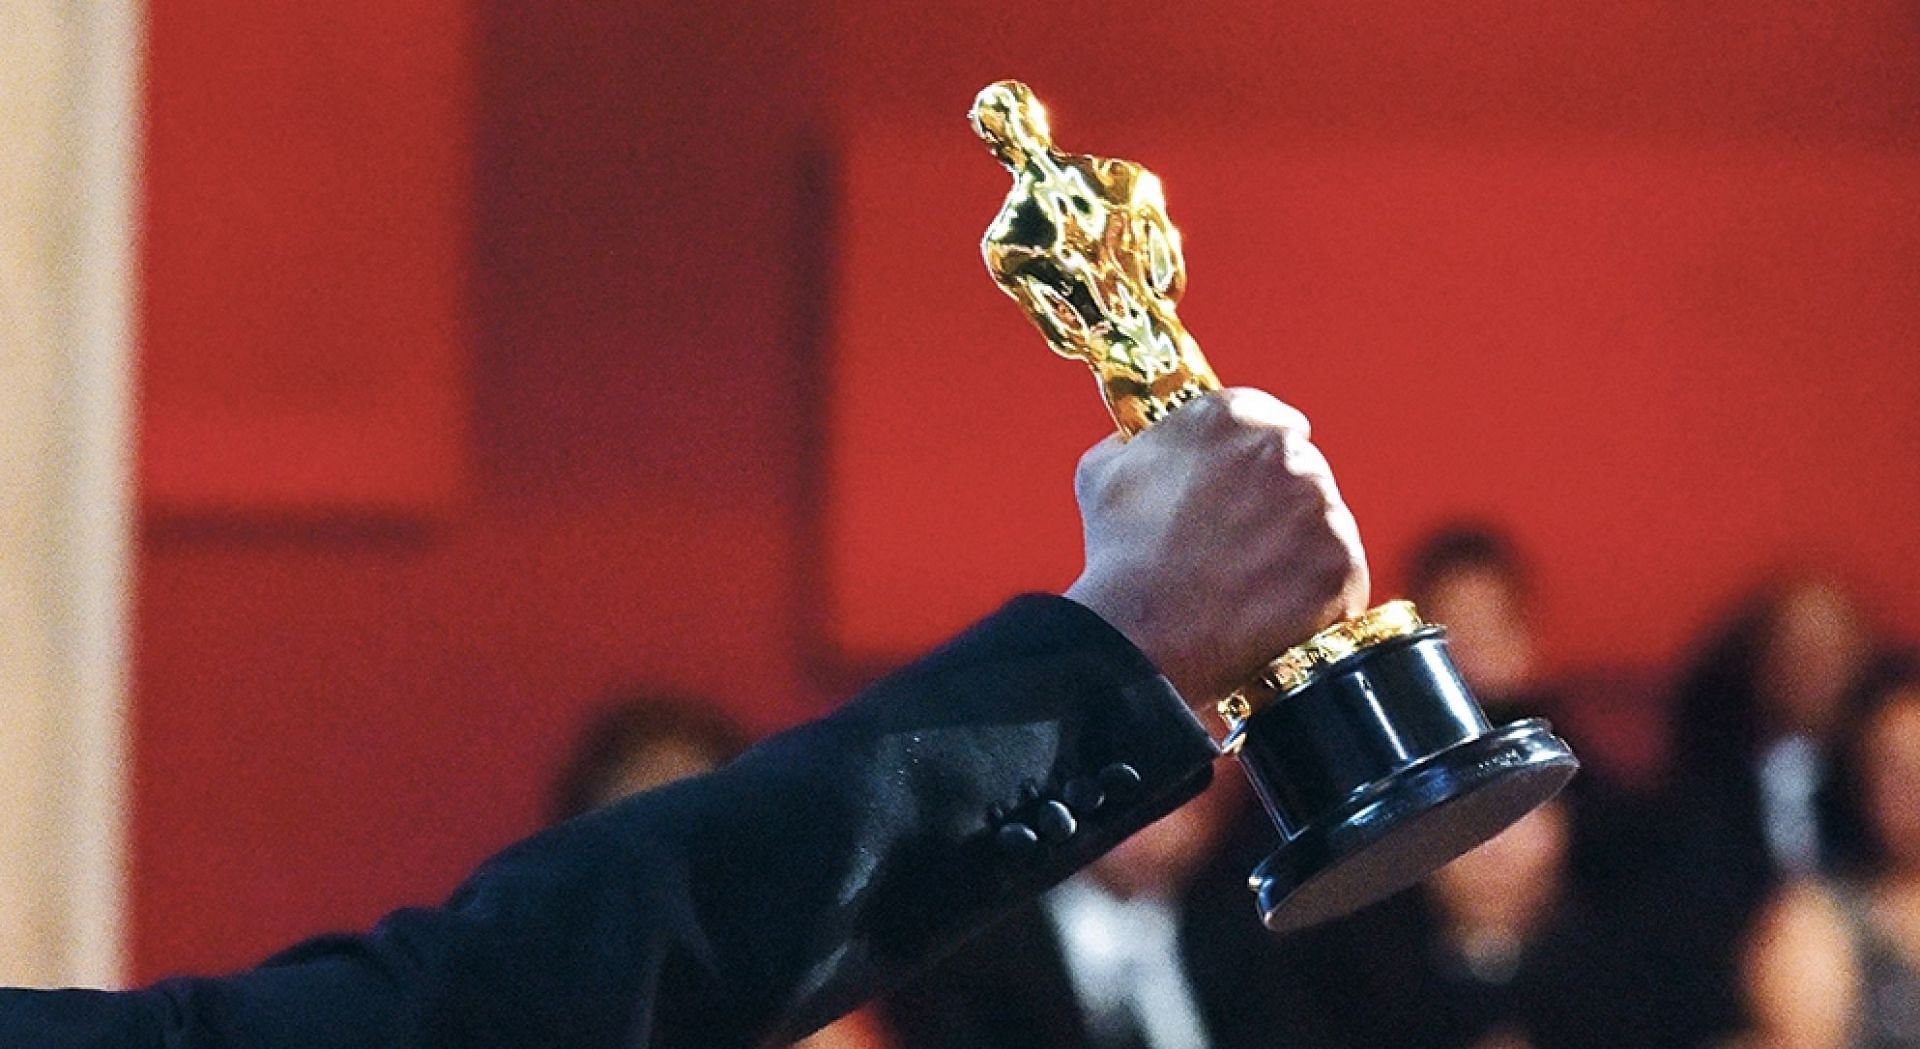 95th Academy Awards will be presented on March 12, 2023 (Image via Getty)